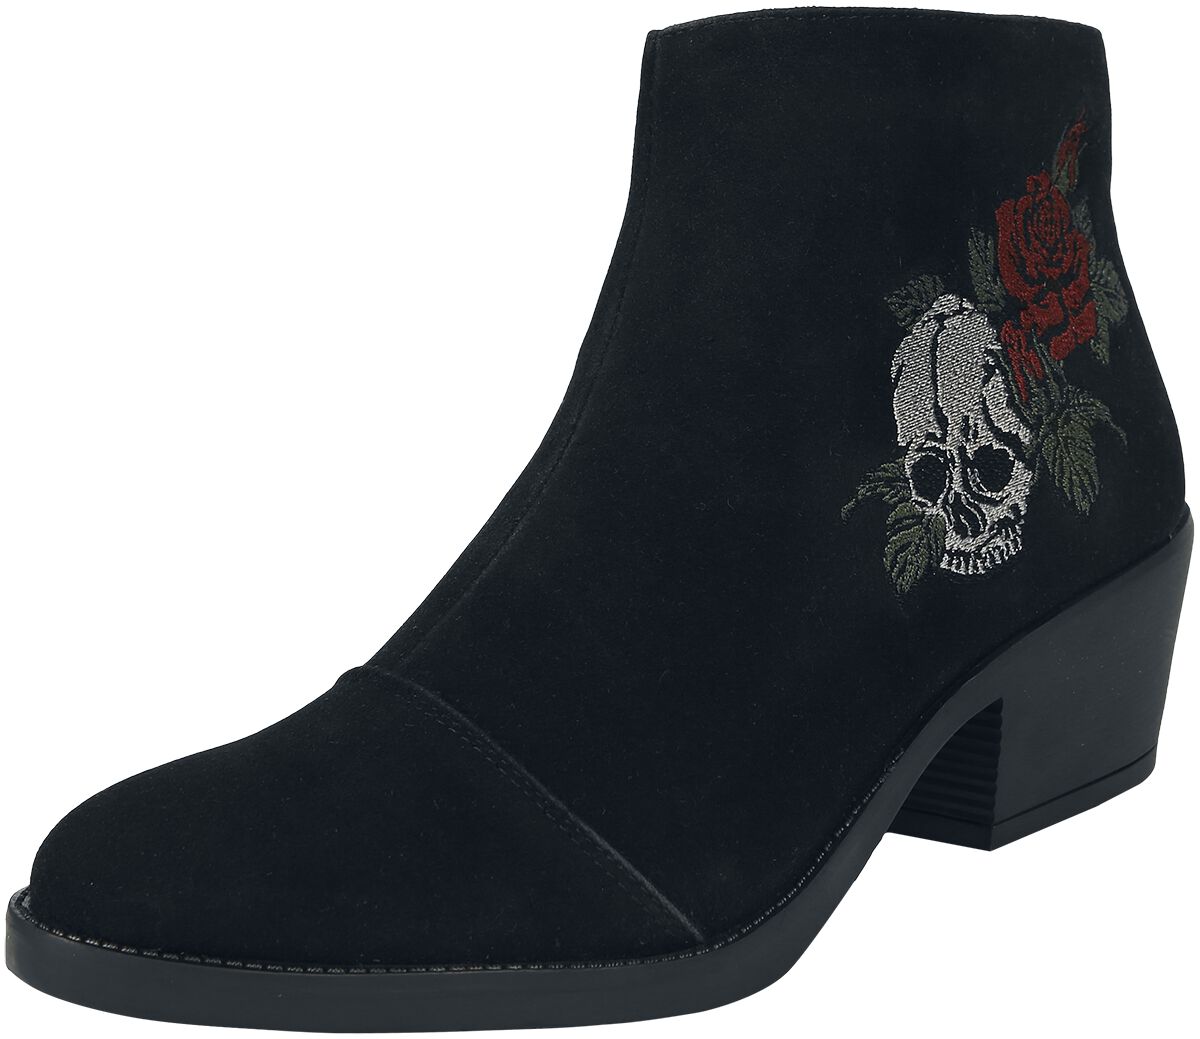 Image of Stivali Rockabilly di Rock Rebel by EMP - Boot with rose and skull embroidery - EU37 a EU40 - Donna - nero